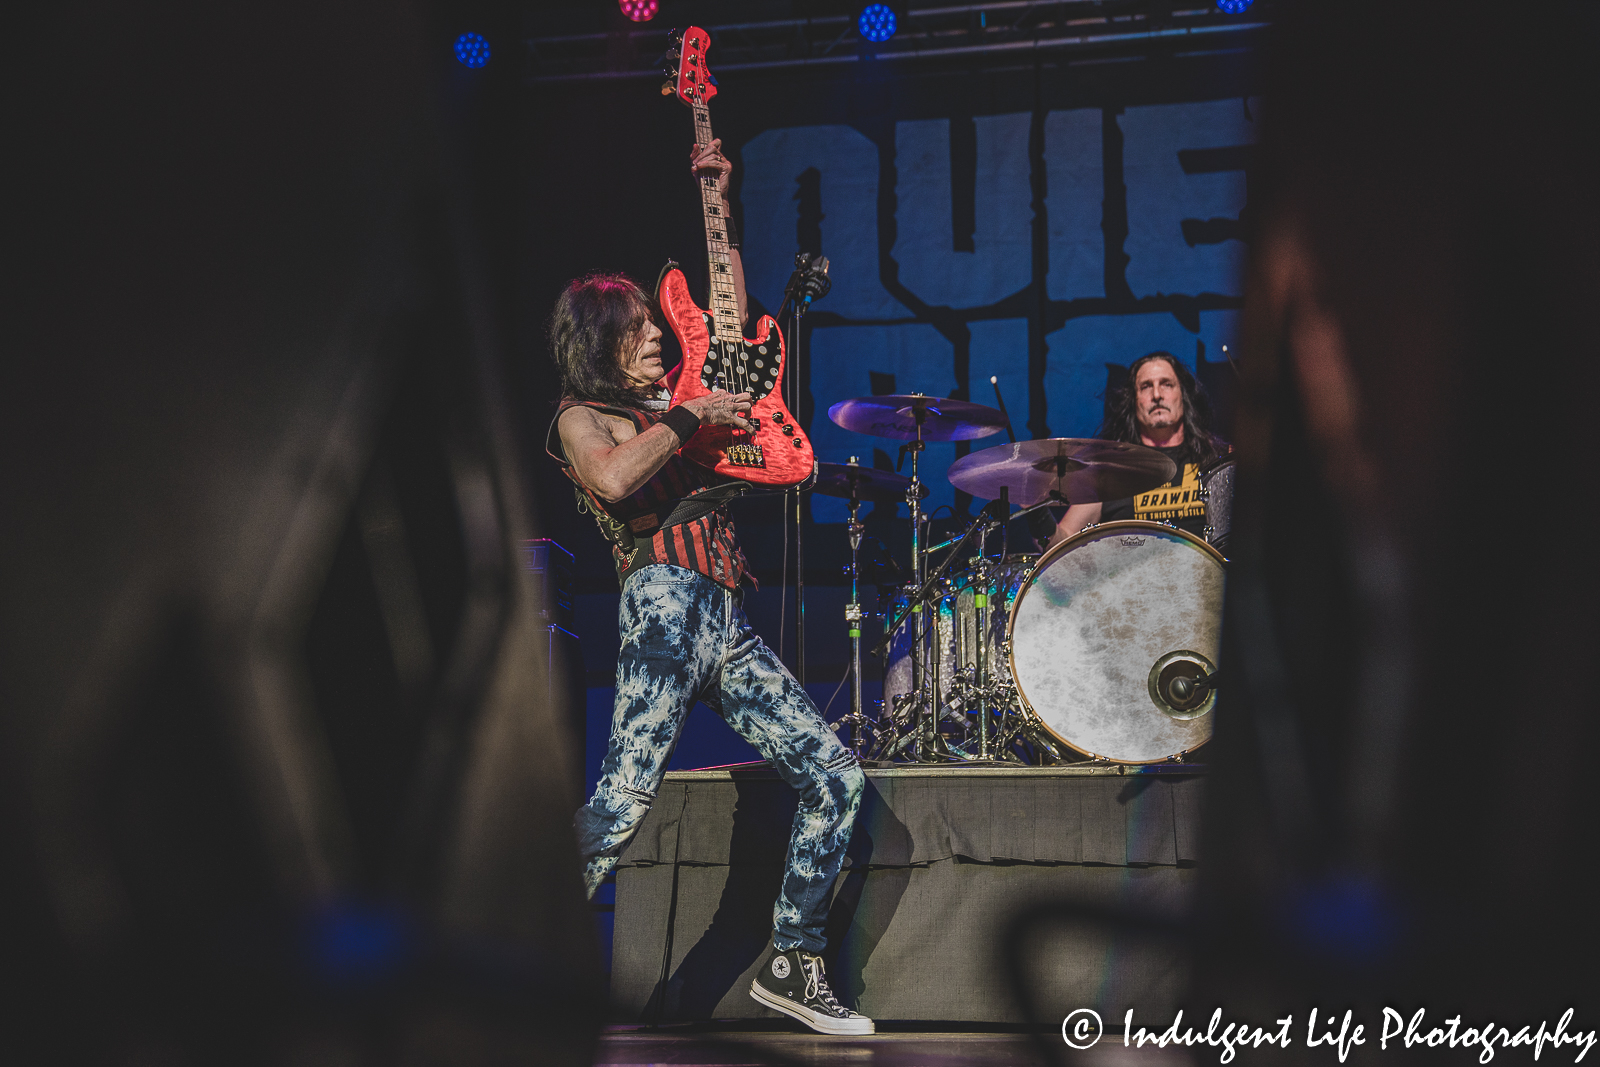 Quiet Riot founding member and bass guitarist Rudy Sarzo with drummer Johnny Kelly opening the show at Ameristar Casino in Kansas City, MO on July 29, 2022.